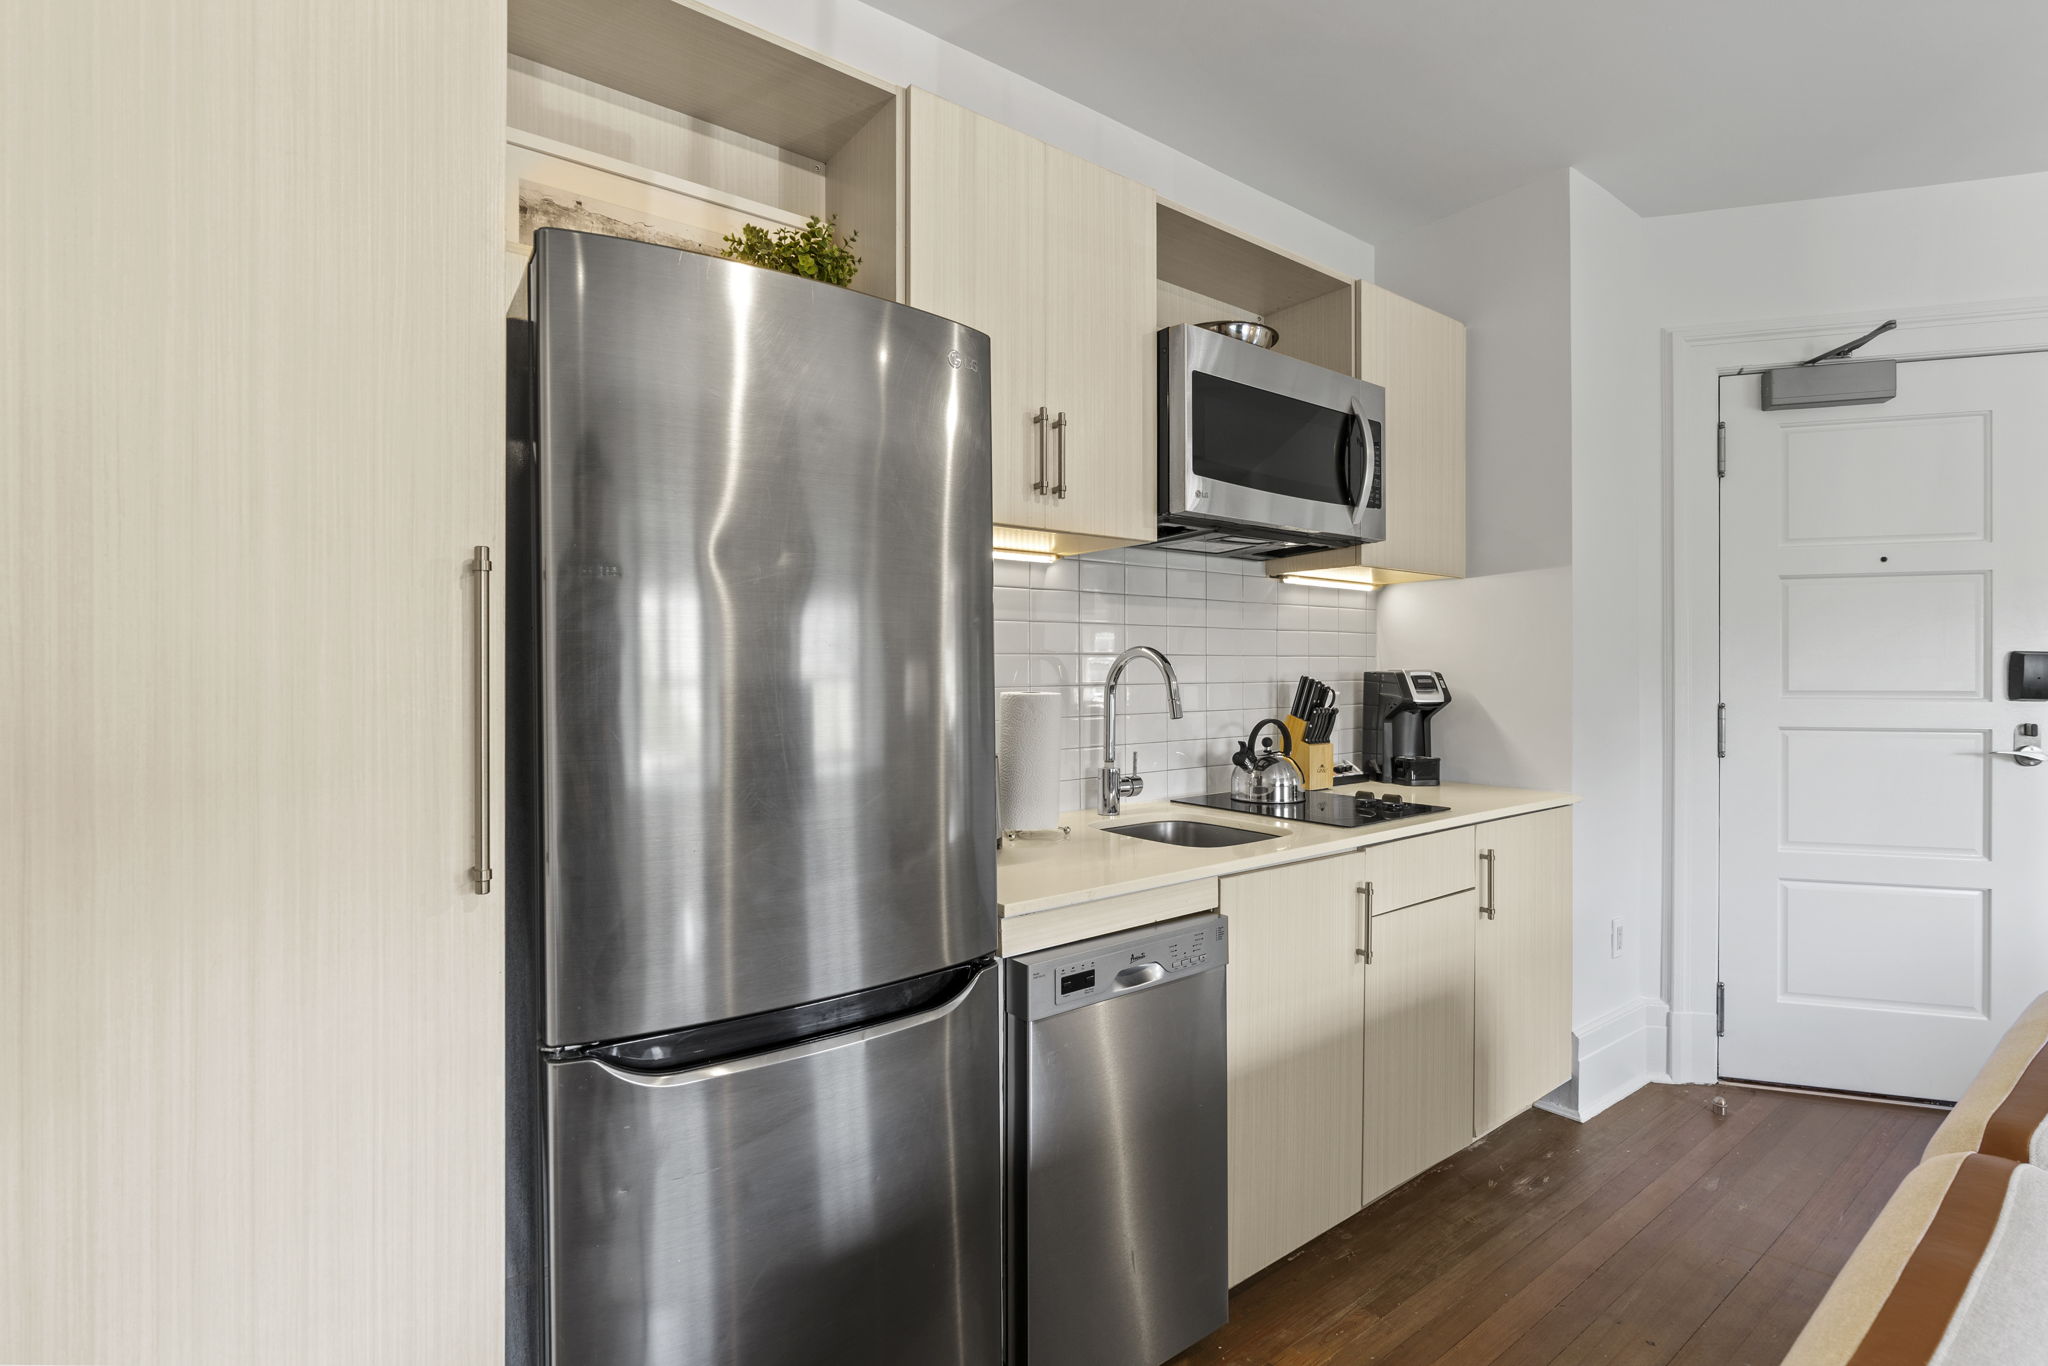 Kitchenette with full fridge and stovetop.